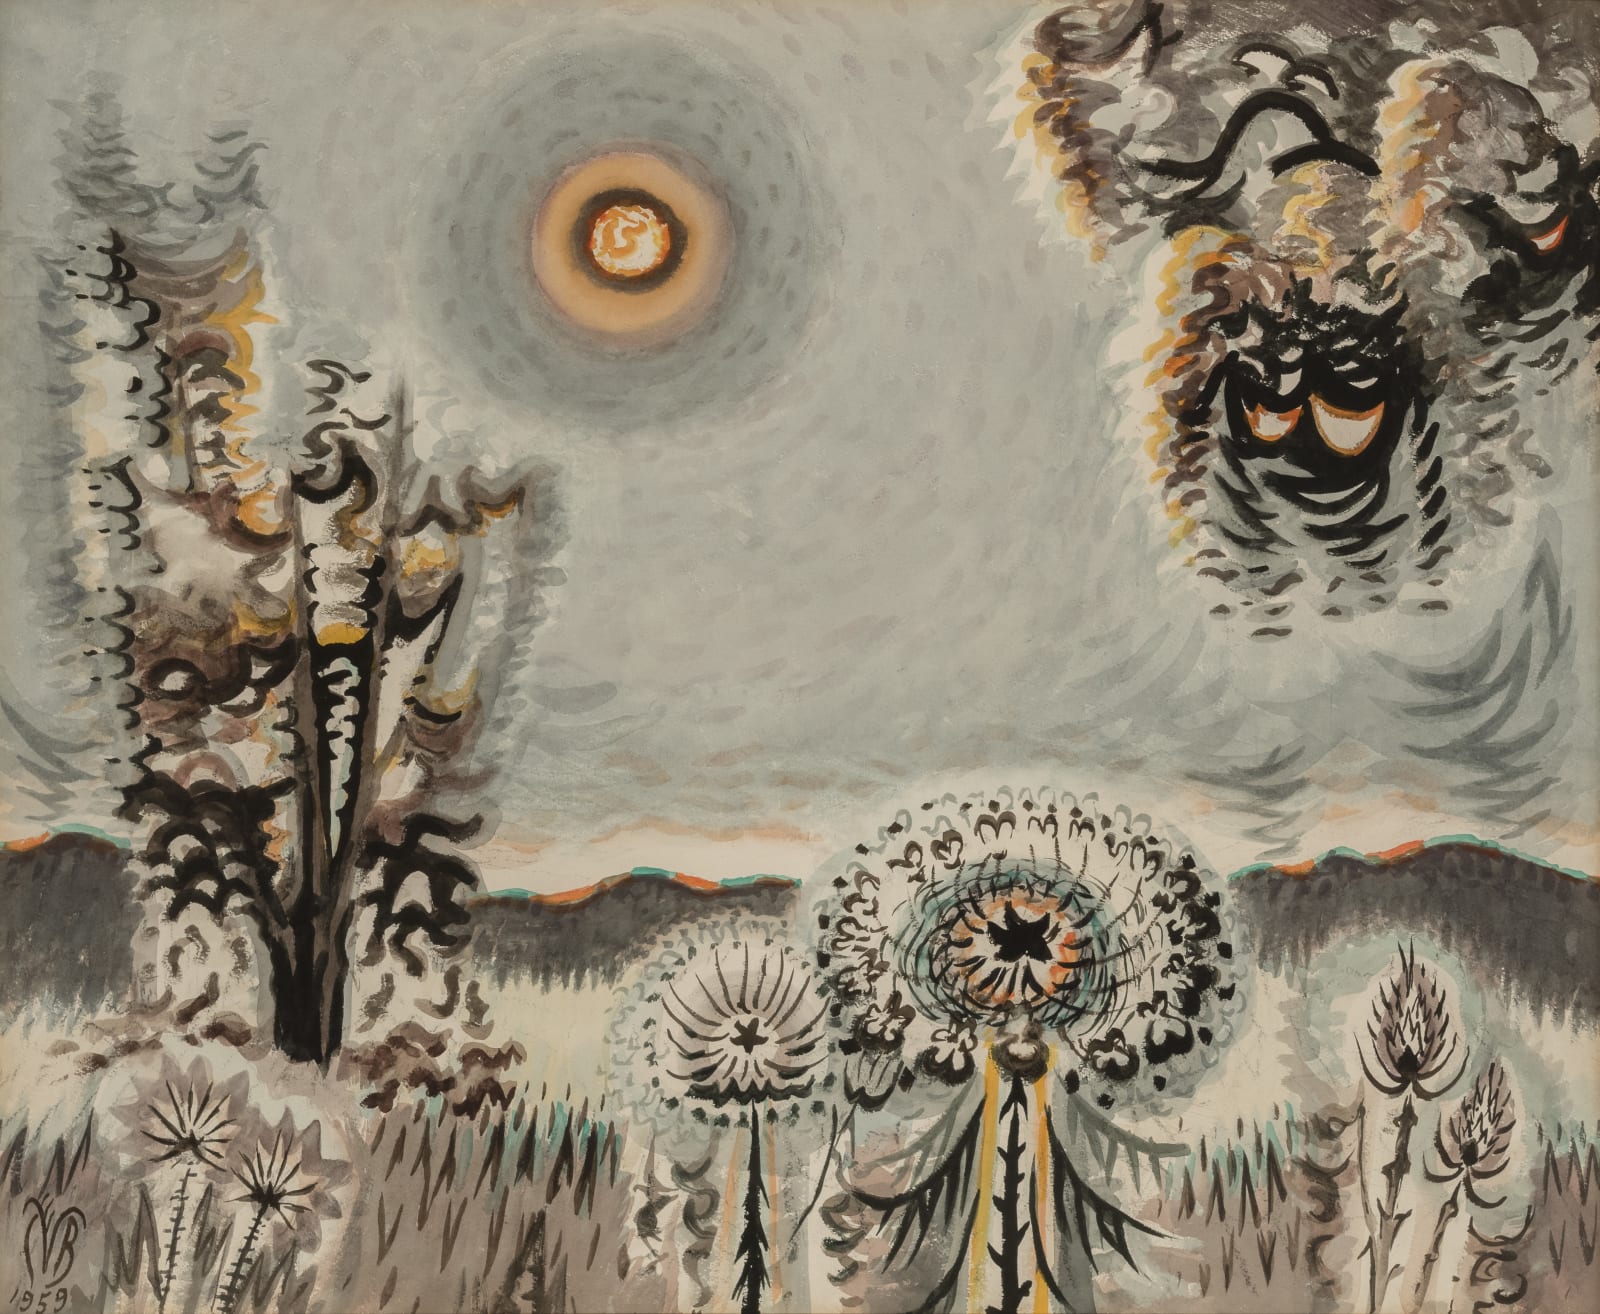 Charles E. Burchfield, Sultry Moon, 1959